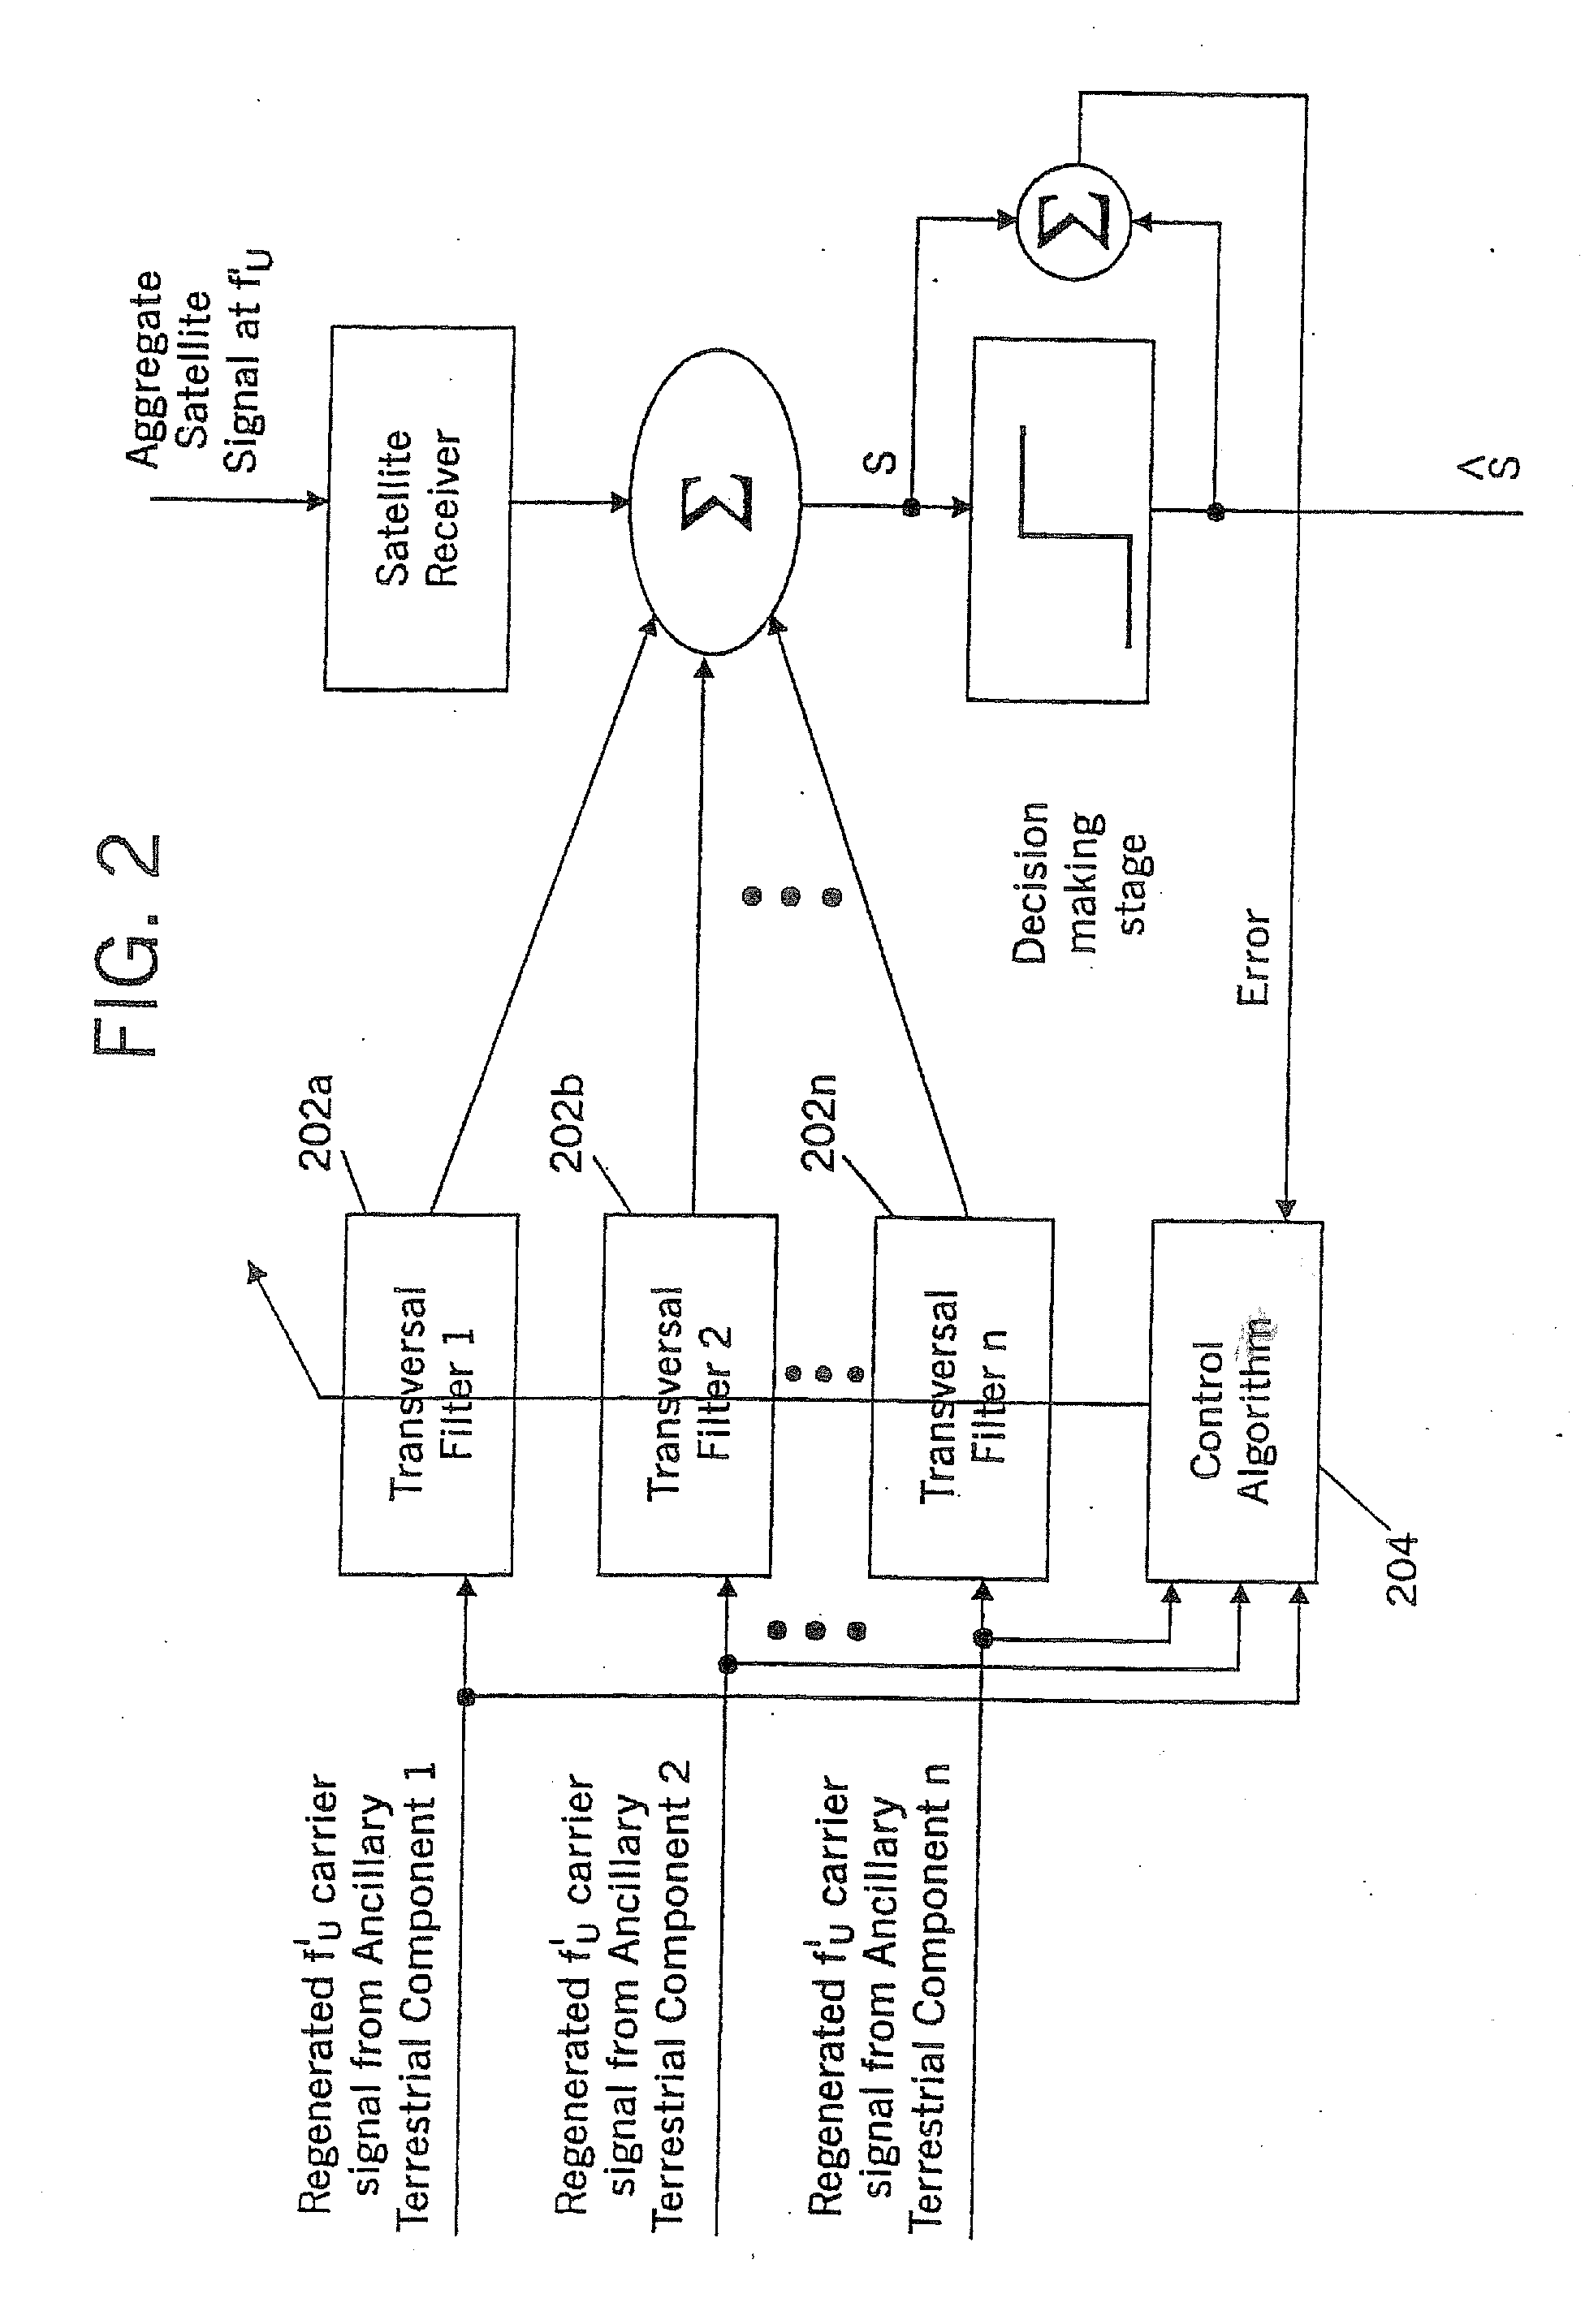 Systems and methods for terrestrial reuse of cellular satellite frequency spectrum using different channel separation technologies in forward and reverse links